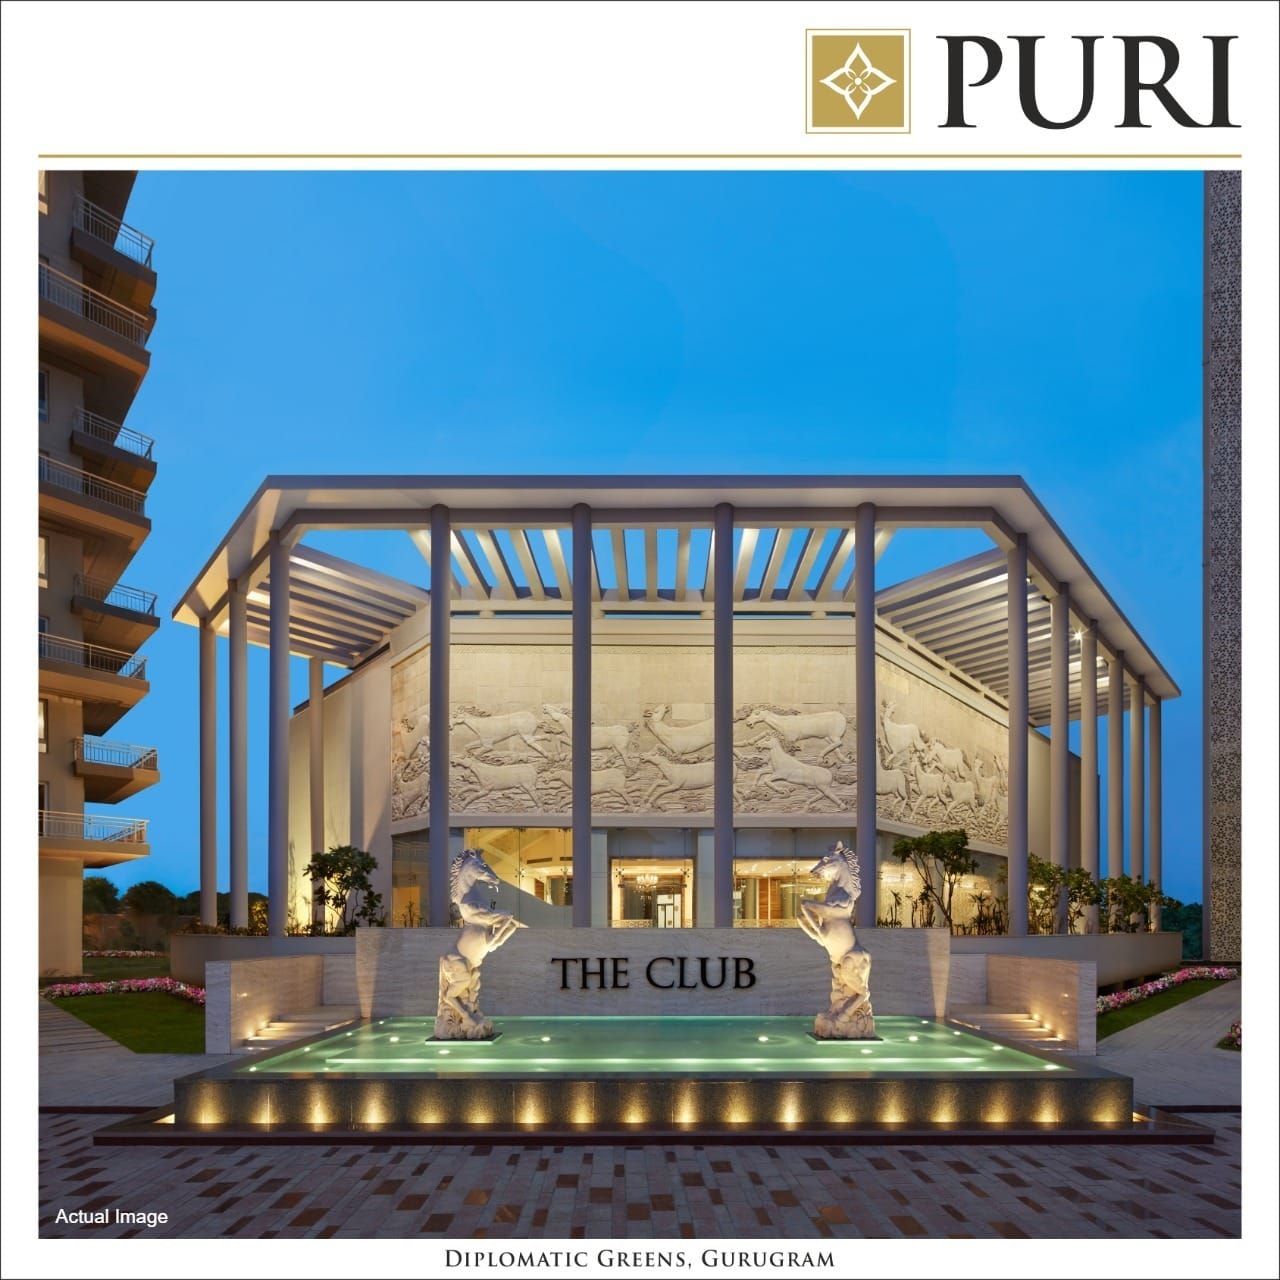 Experience the pinnacle of luxury as you explore an immaculate club house at Puri Diplomatic Greens, Gurgaon Update